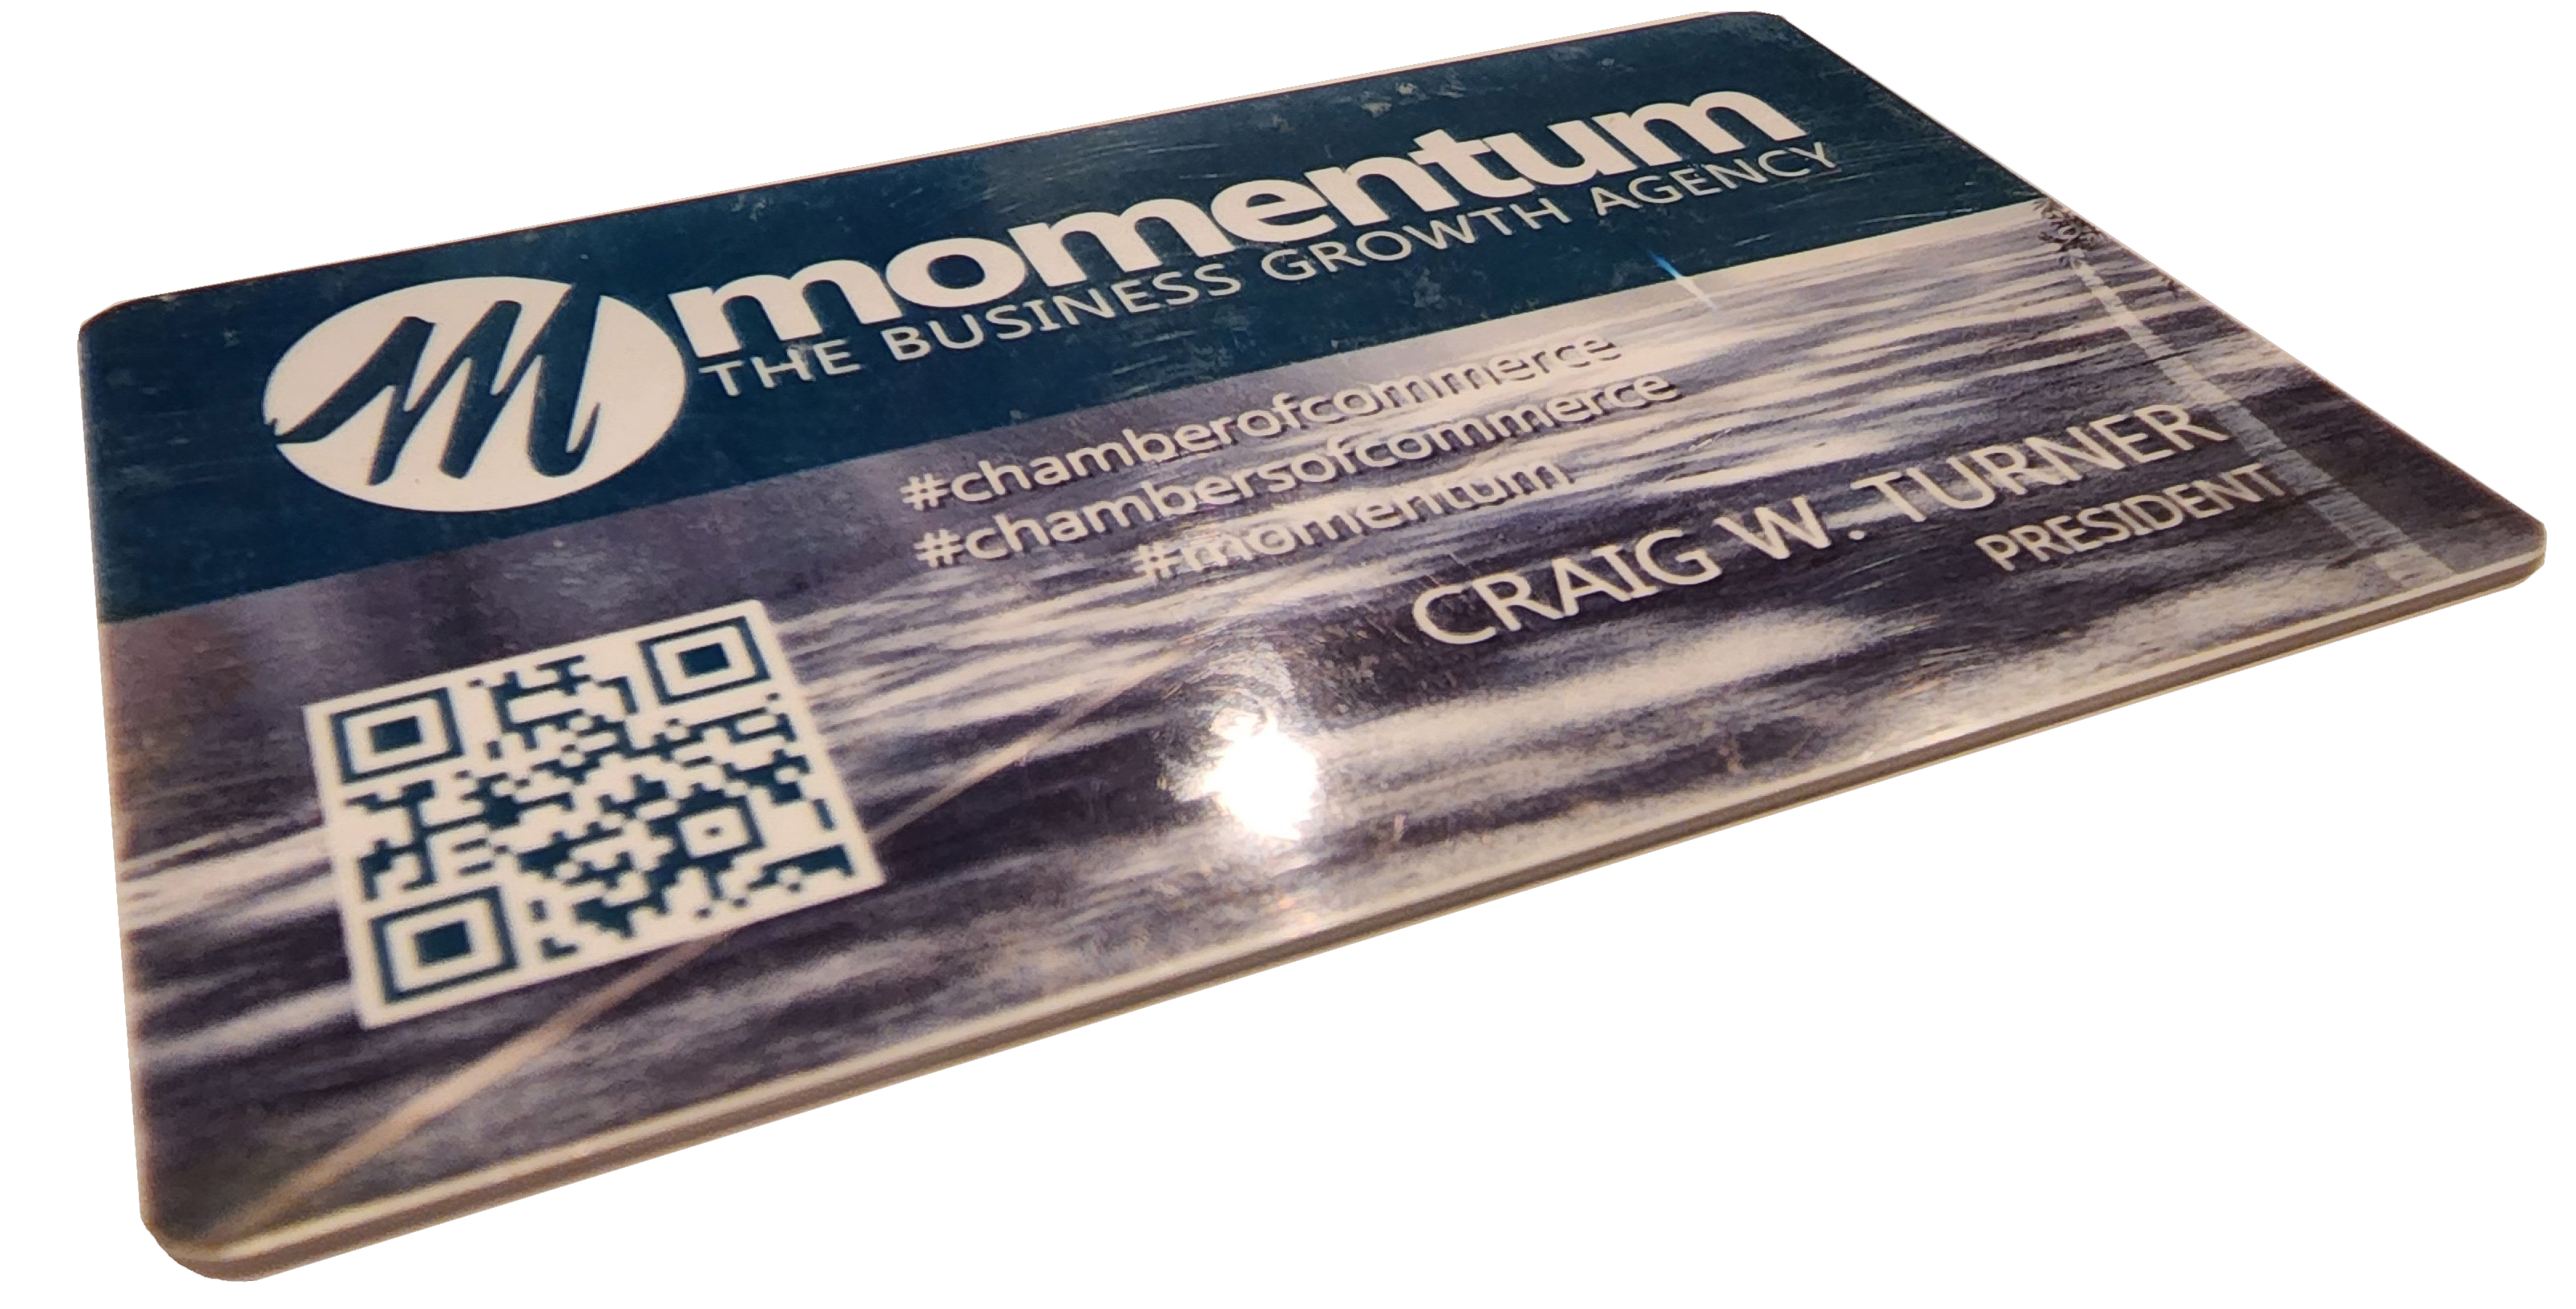 chamber of commerce, chambers of commerce, momentum, networking, digital business card